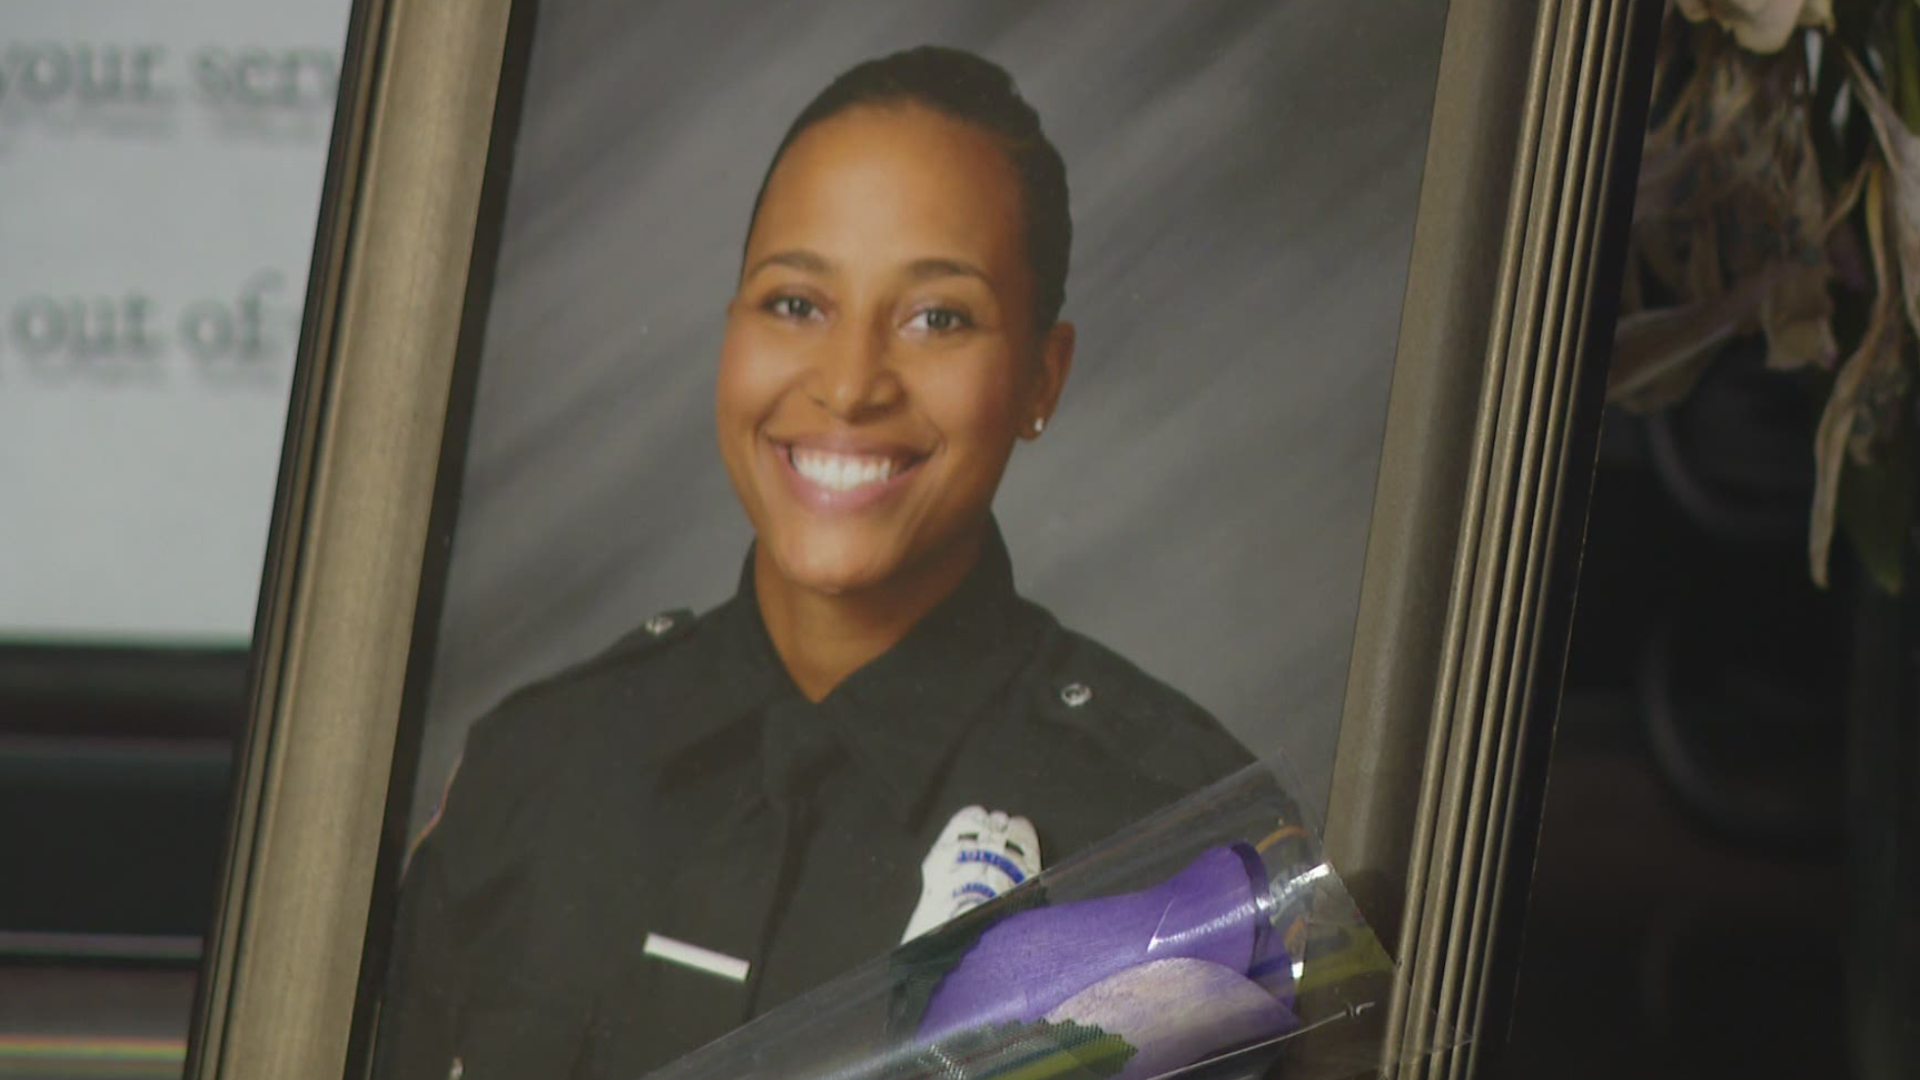 It's a different kind of memorial for a fallen metro police officer.